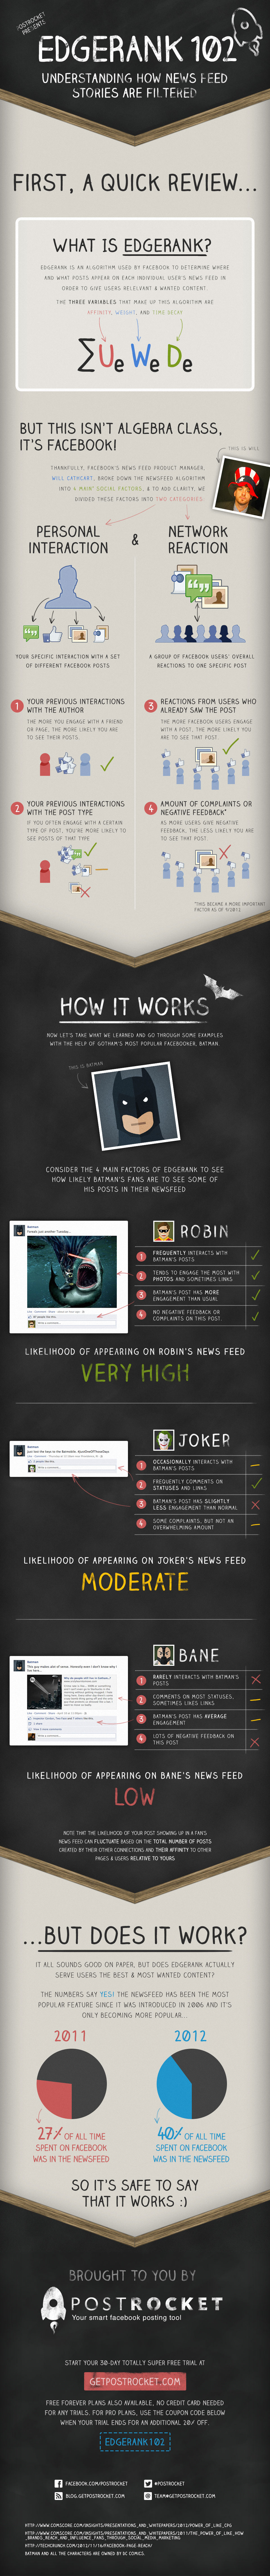 Understand Edgerank and Thrive on the Facebook Newsfeed With This Infographic